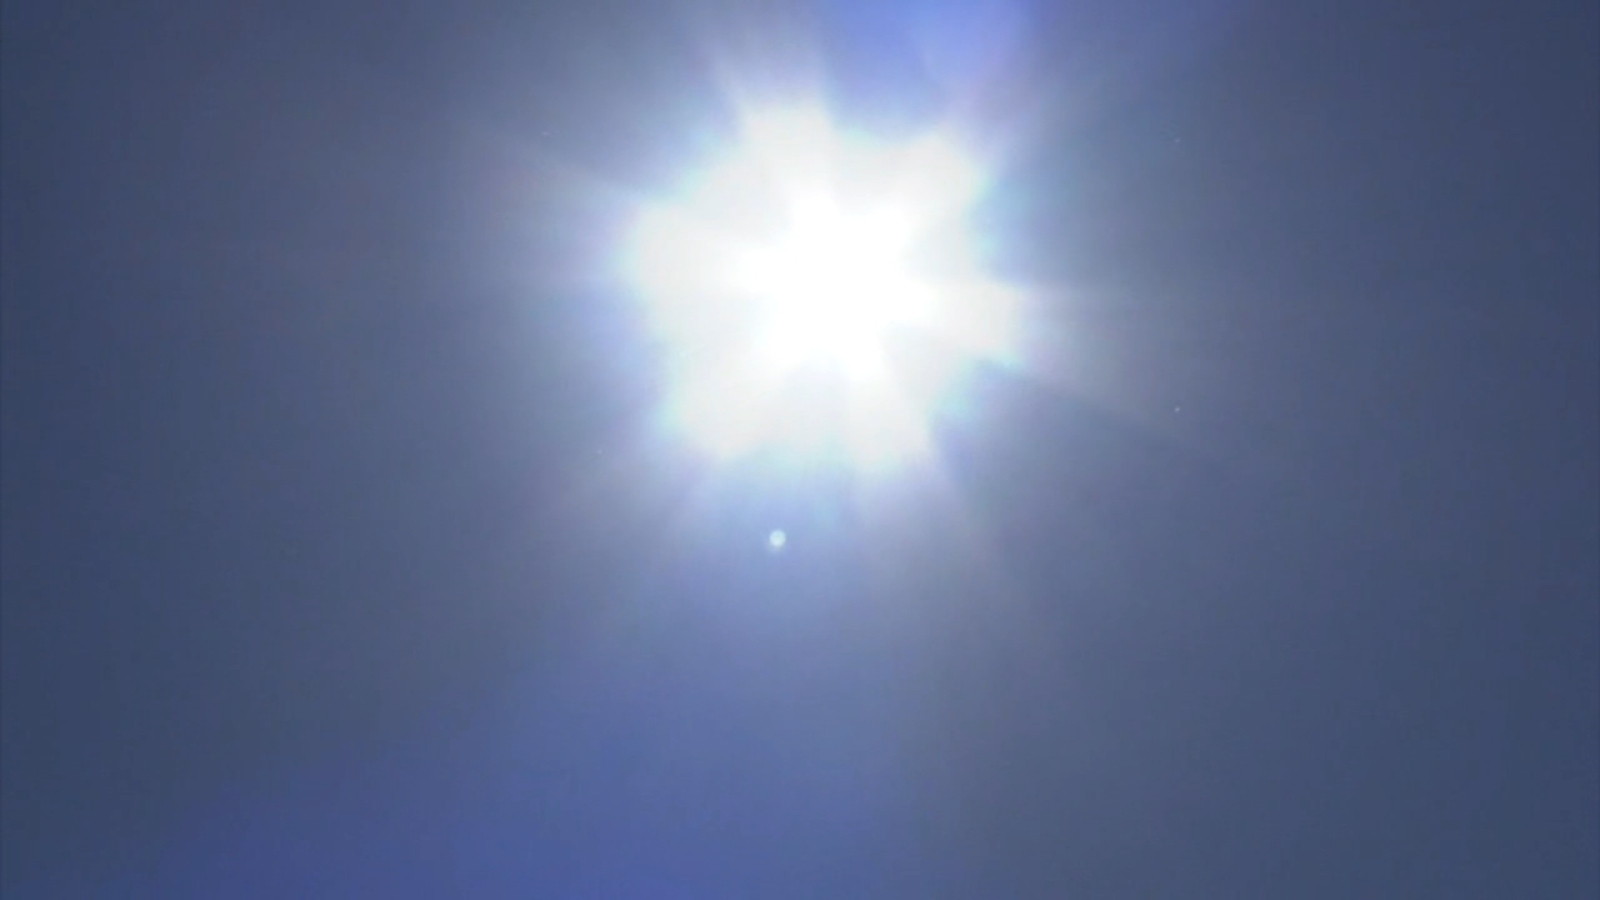 TIMELINE: Heat wave will bring hottest temps to inland Bay Area in nearly 2 years